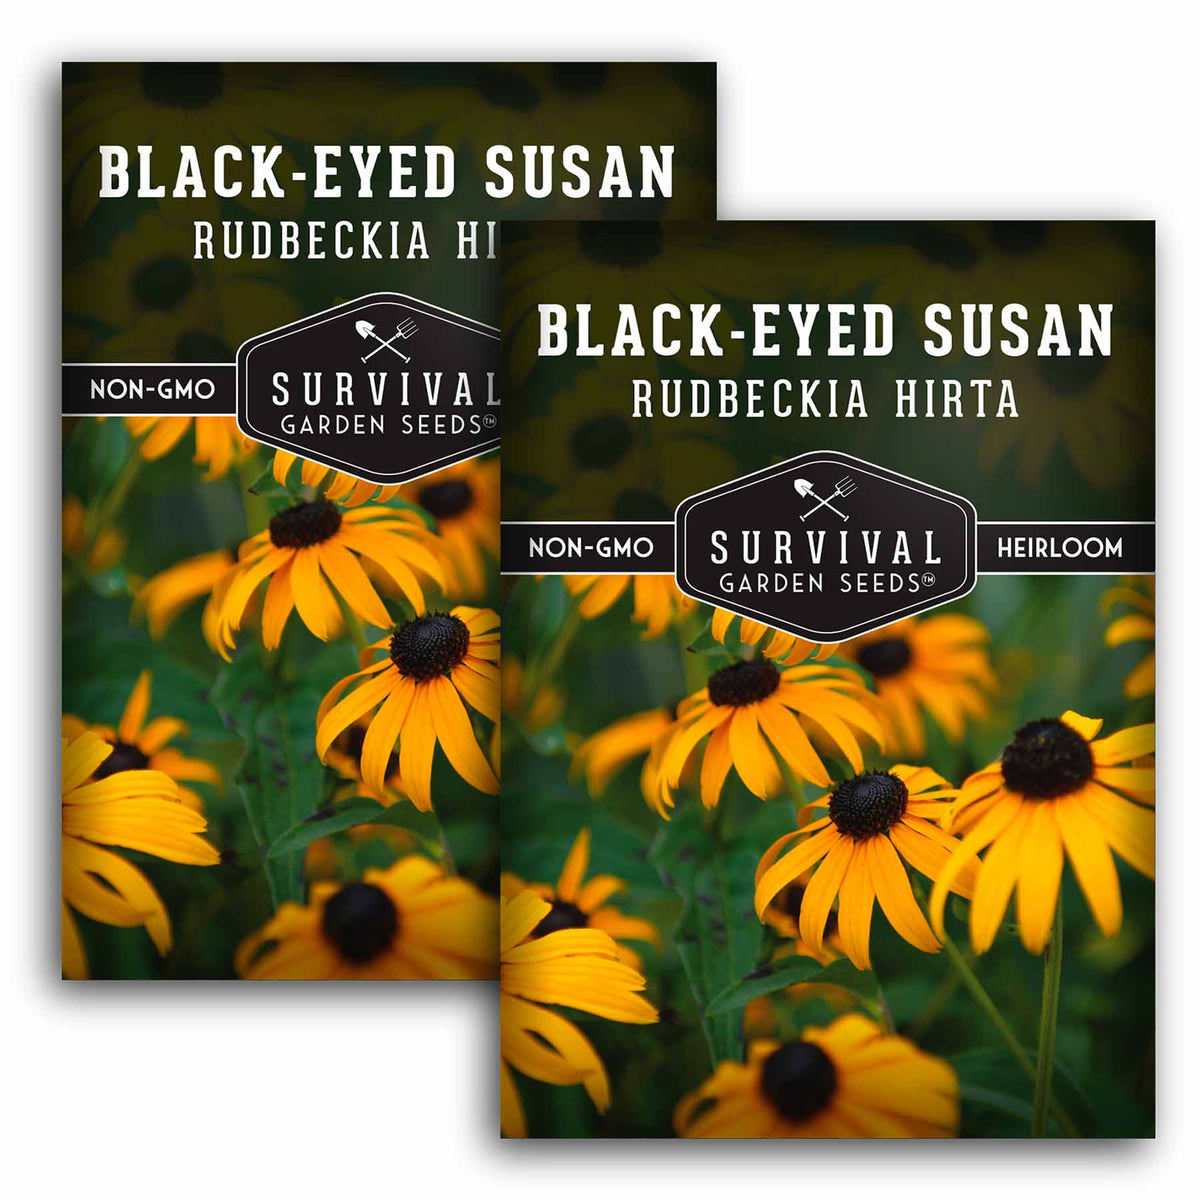 2 packets of Blackeyed Susan seeds